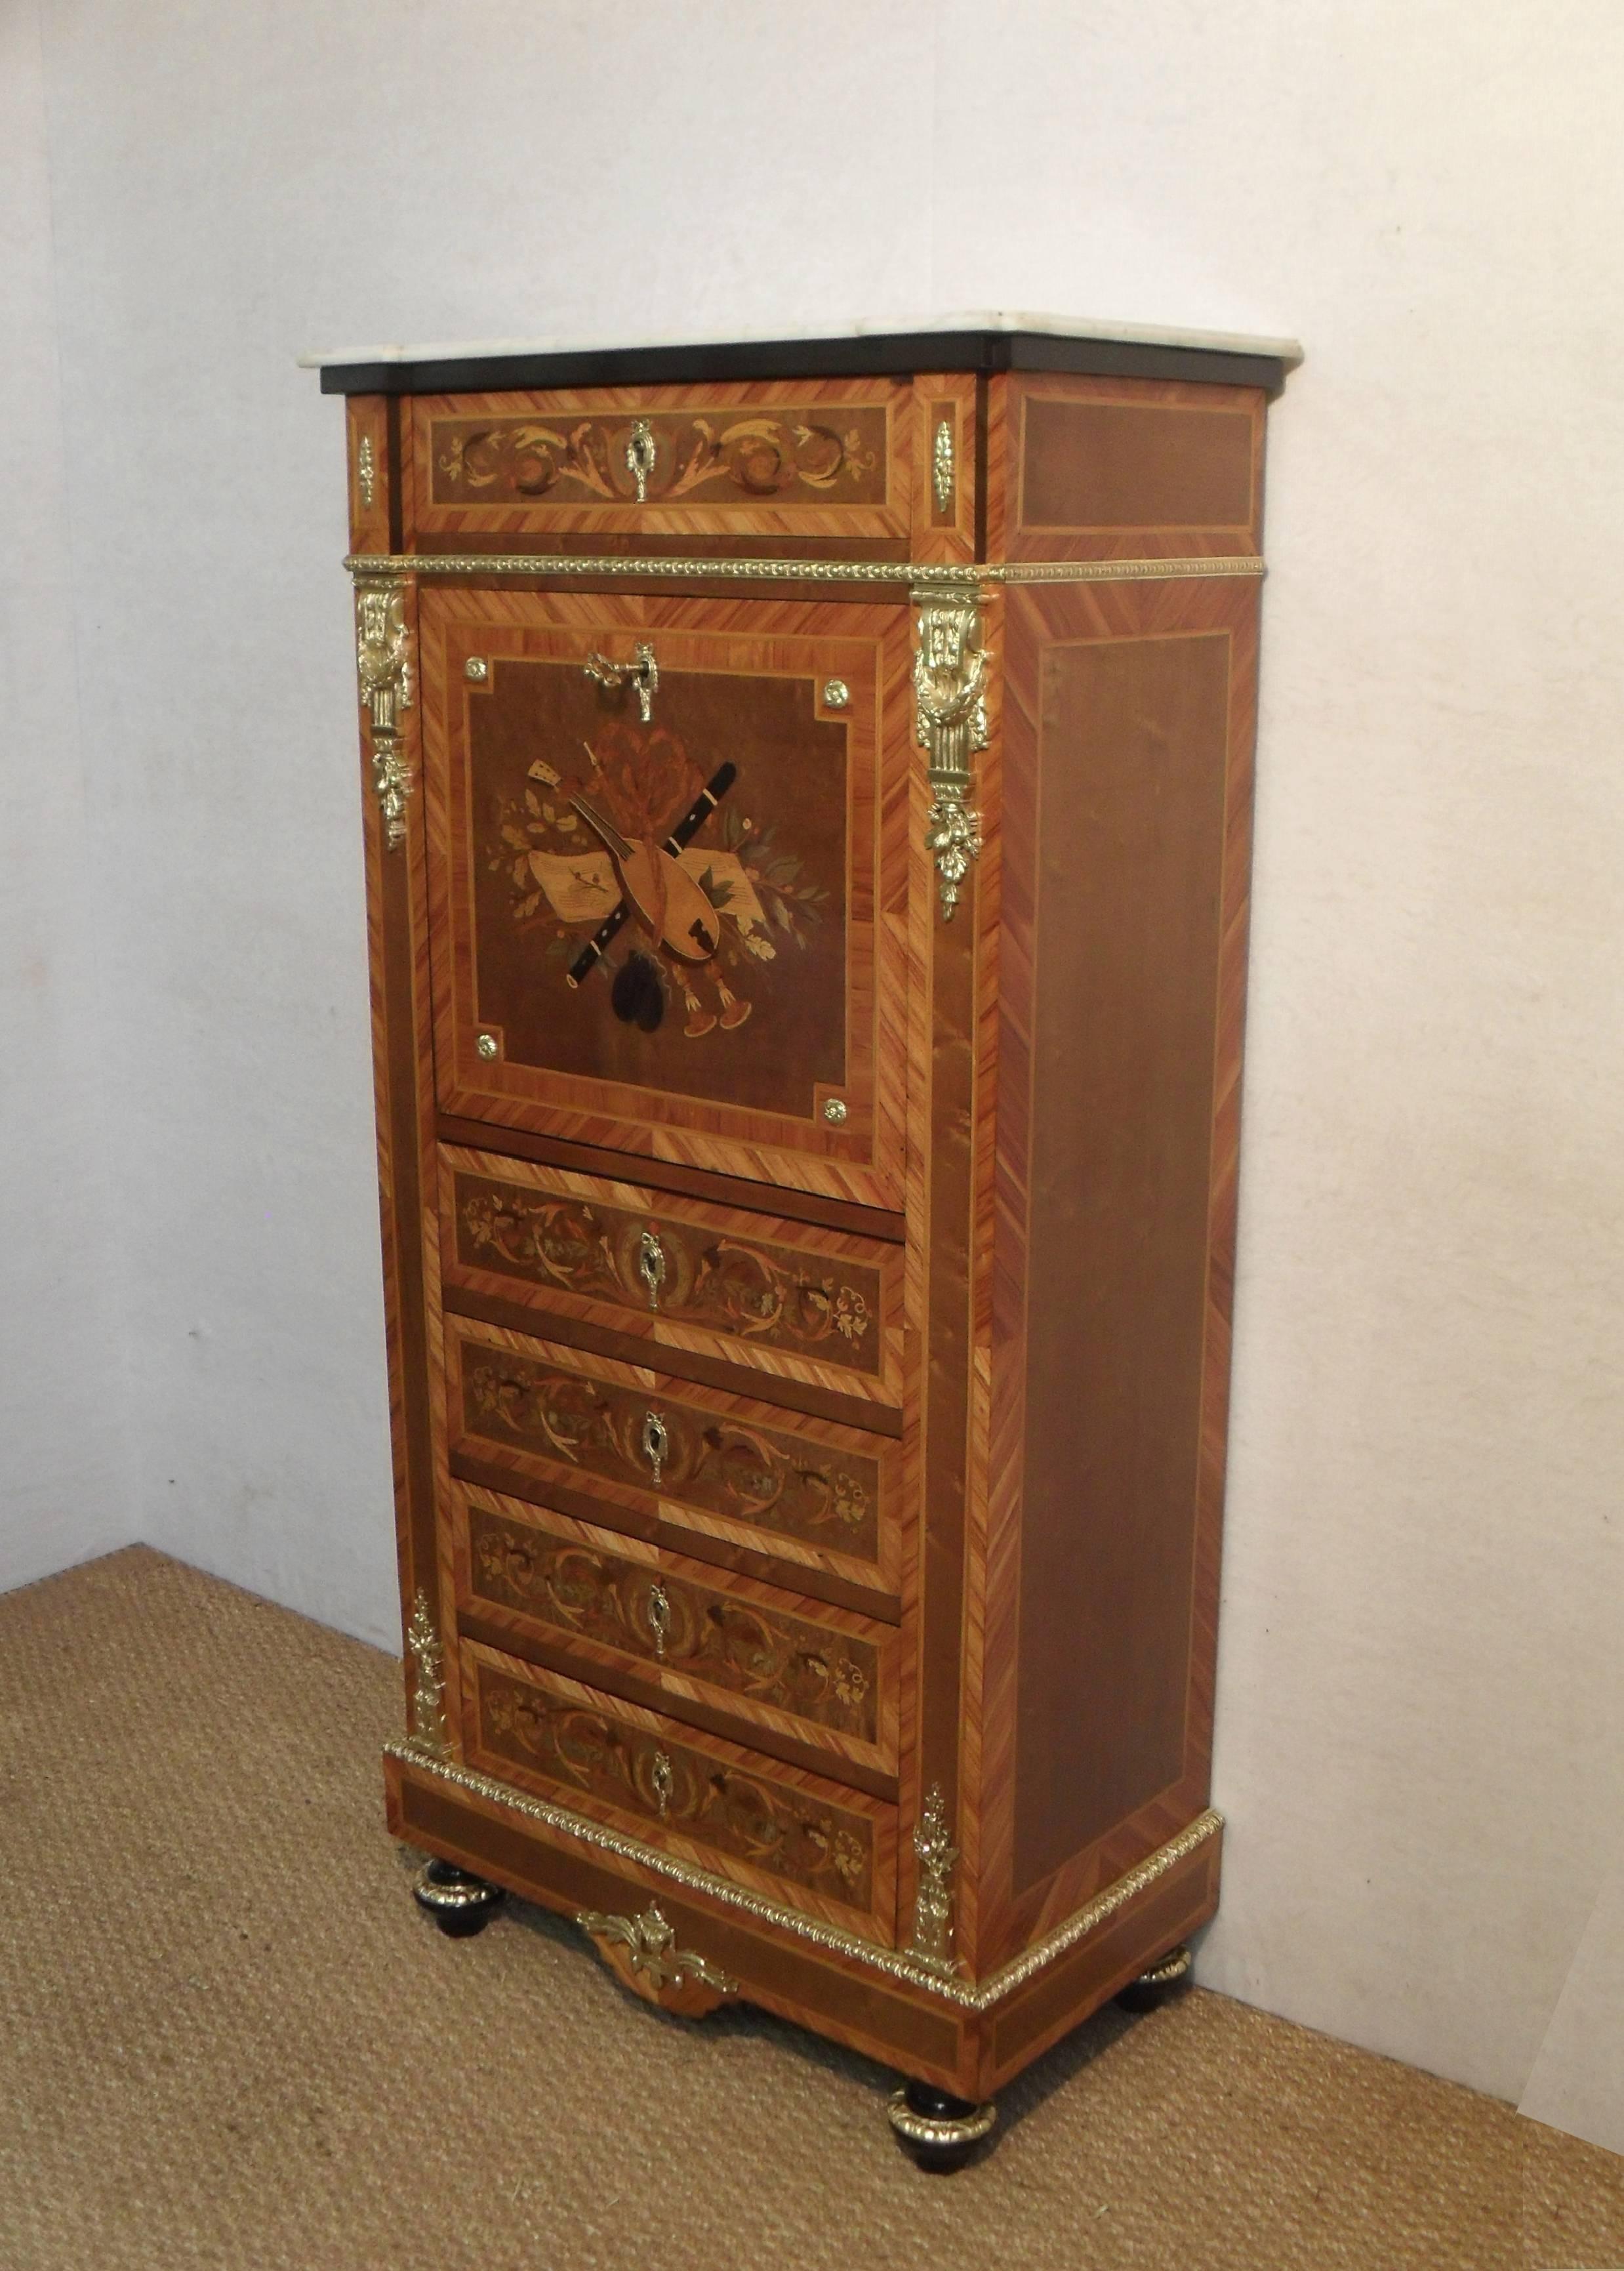 An exceptional quality French marquetry inlaid escritoire writing cabinet. The fall is beautifully inlaid with musical instruments and the drawers with a scroll leaf design made up of various coloured woods. The cabinet has dyed bird's-eye maple